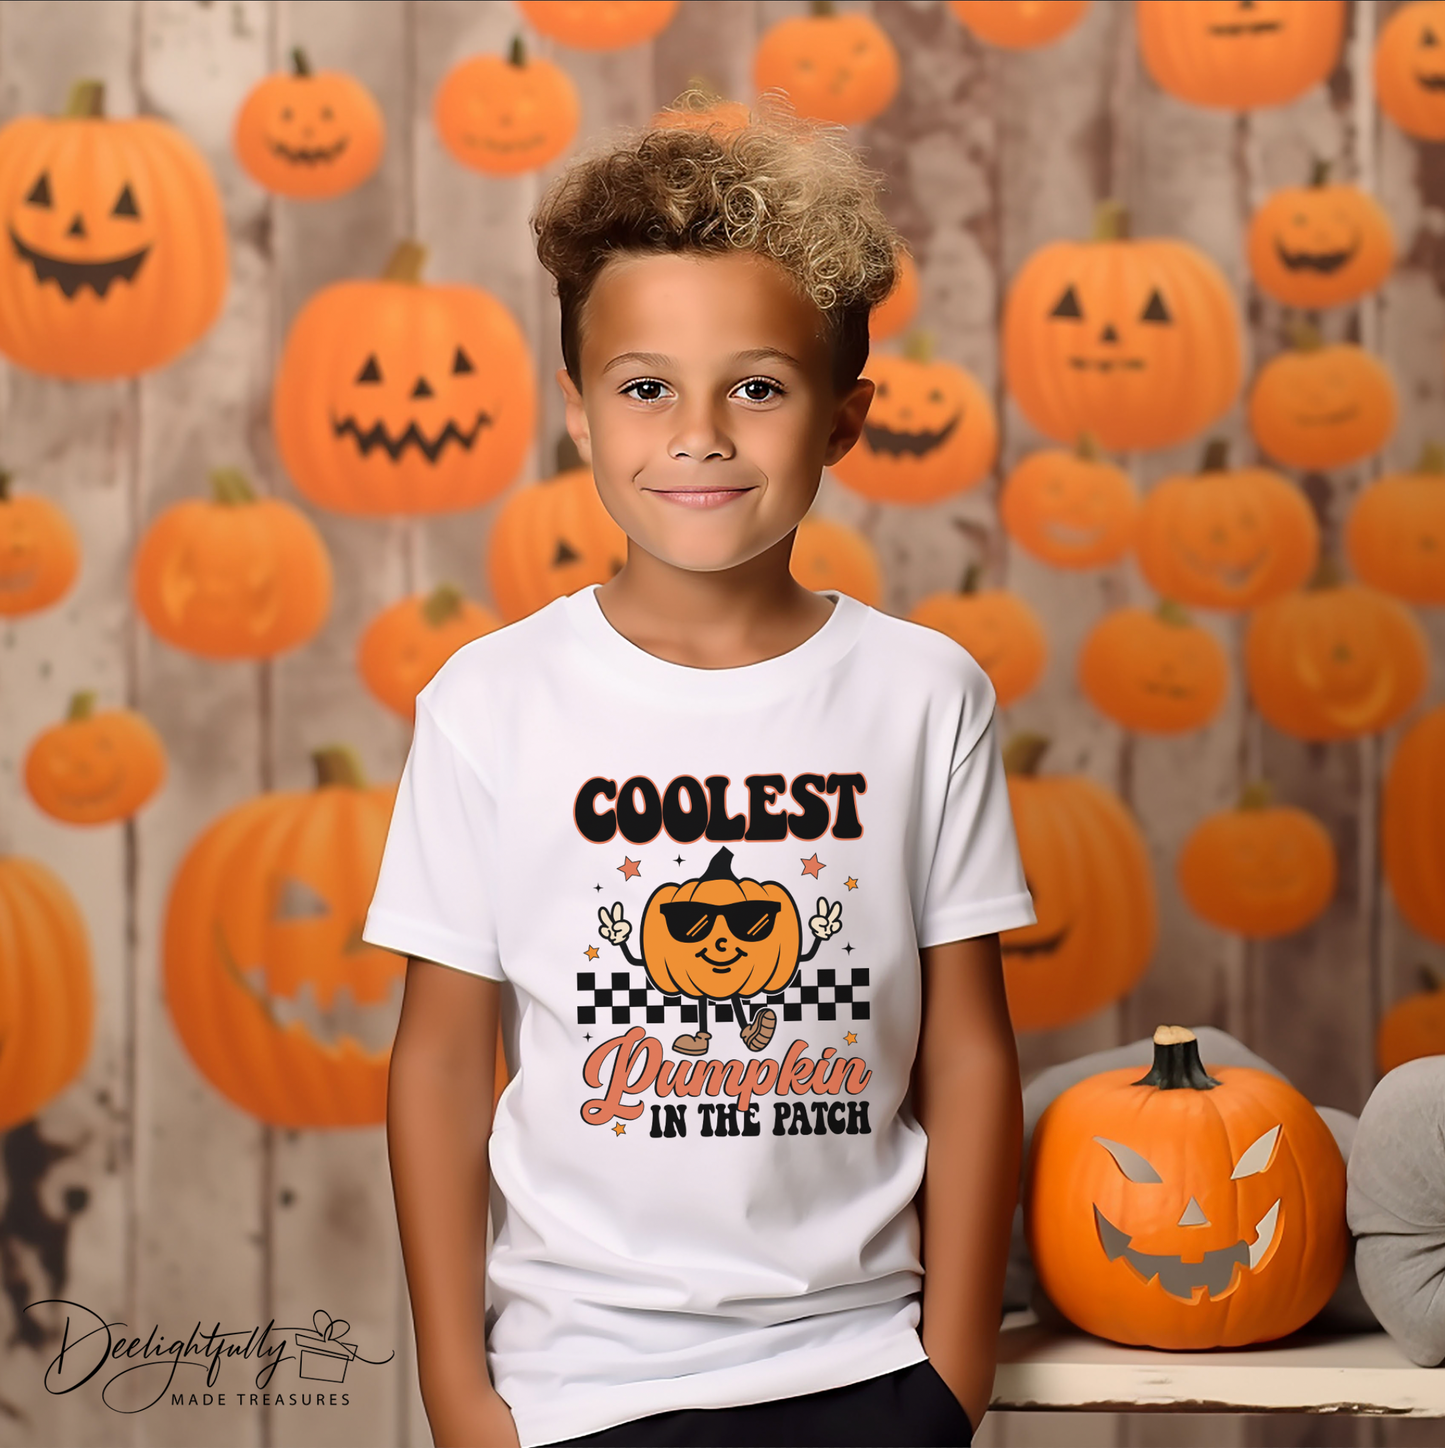 Boy wearing a white Bella + Canvas crewneck shirt with Coolest Pumpkin in the Patch Design